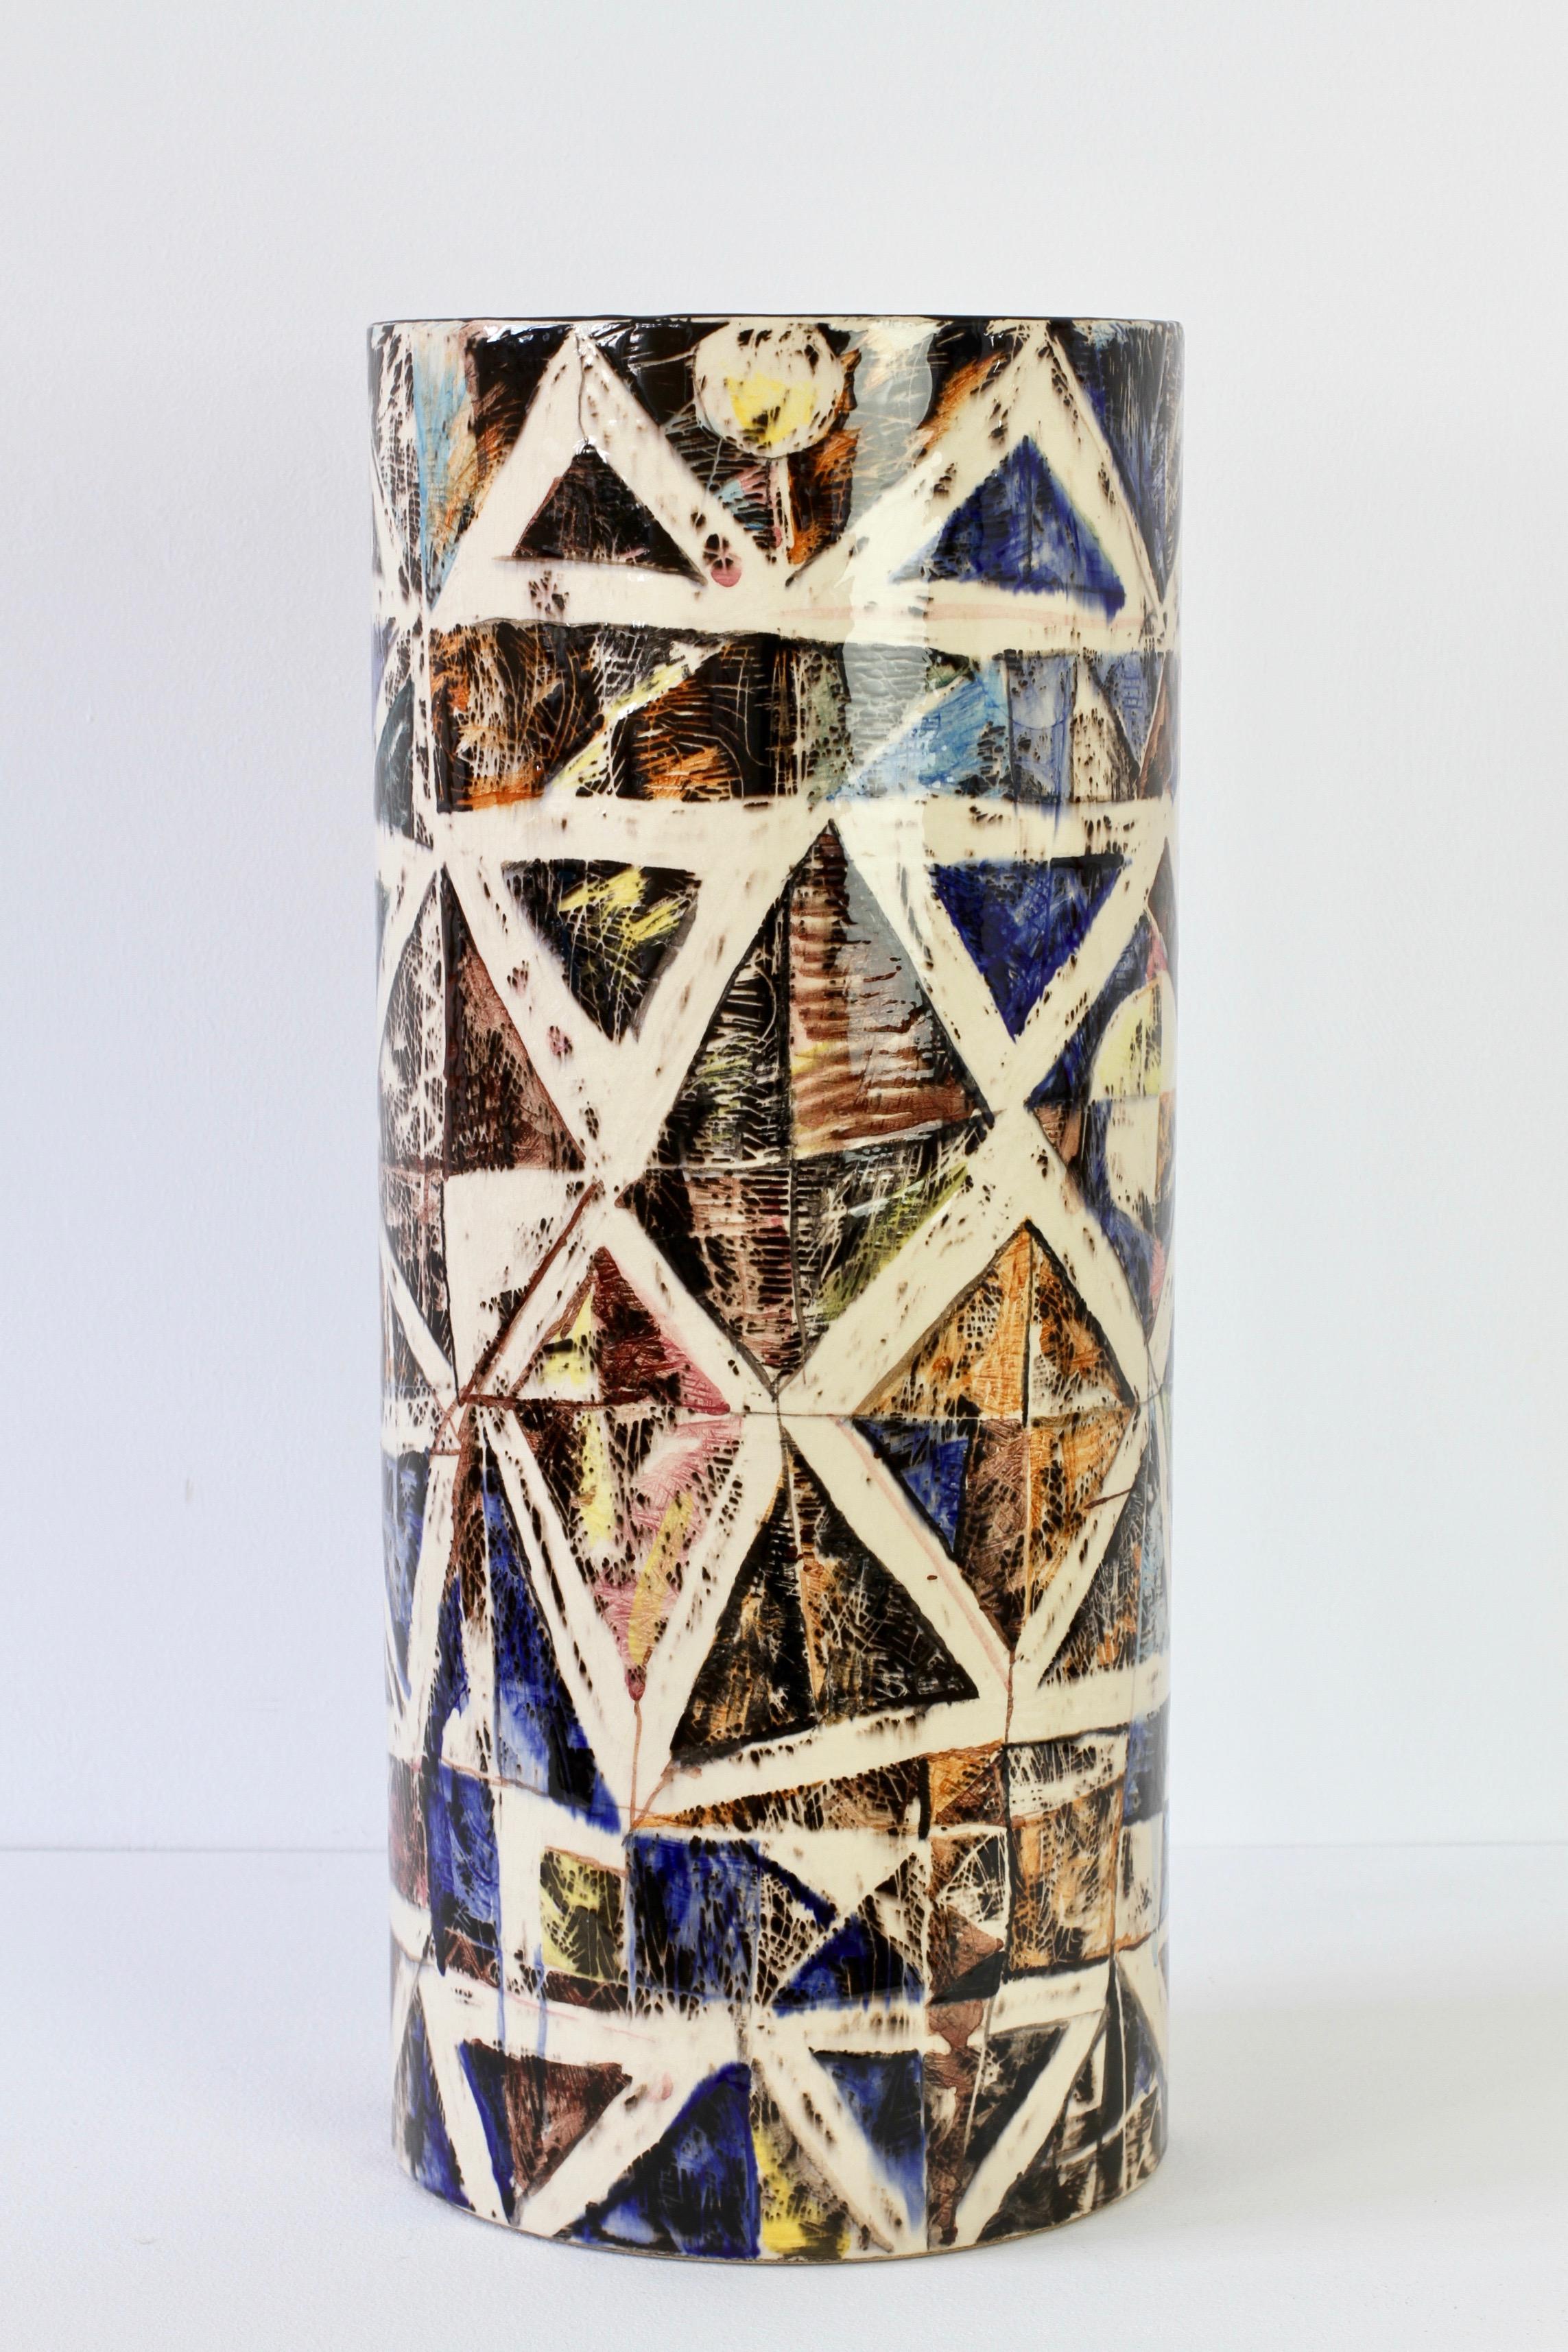 Stunning, unique one off & rare Mid-Century Modern vintage umbrella Stand or holder signed and dated (5.1.1965) by the German artist Eberhard Dänzer (1935-2008) Karlsruhe, Germany in 1965. Hand decorated with colorful geometric shapes - almost